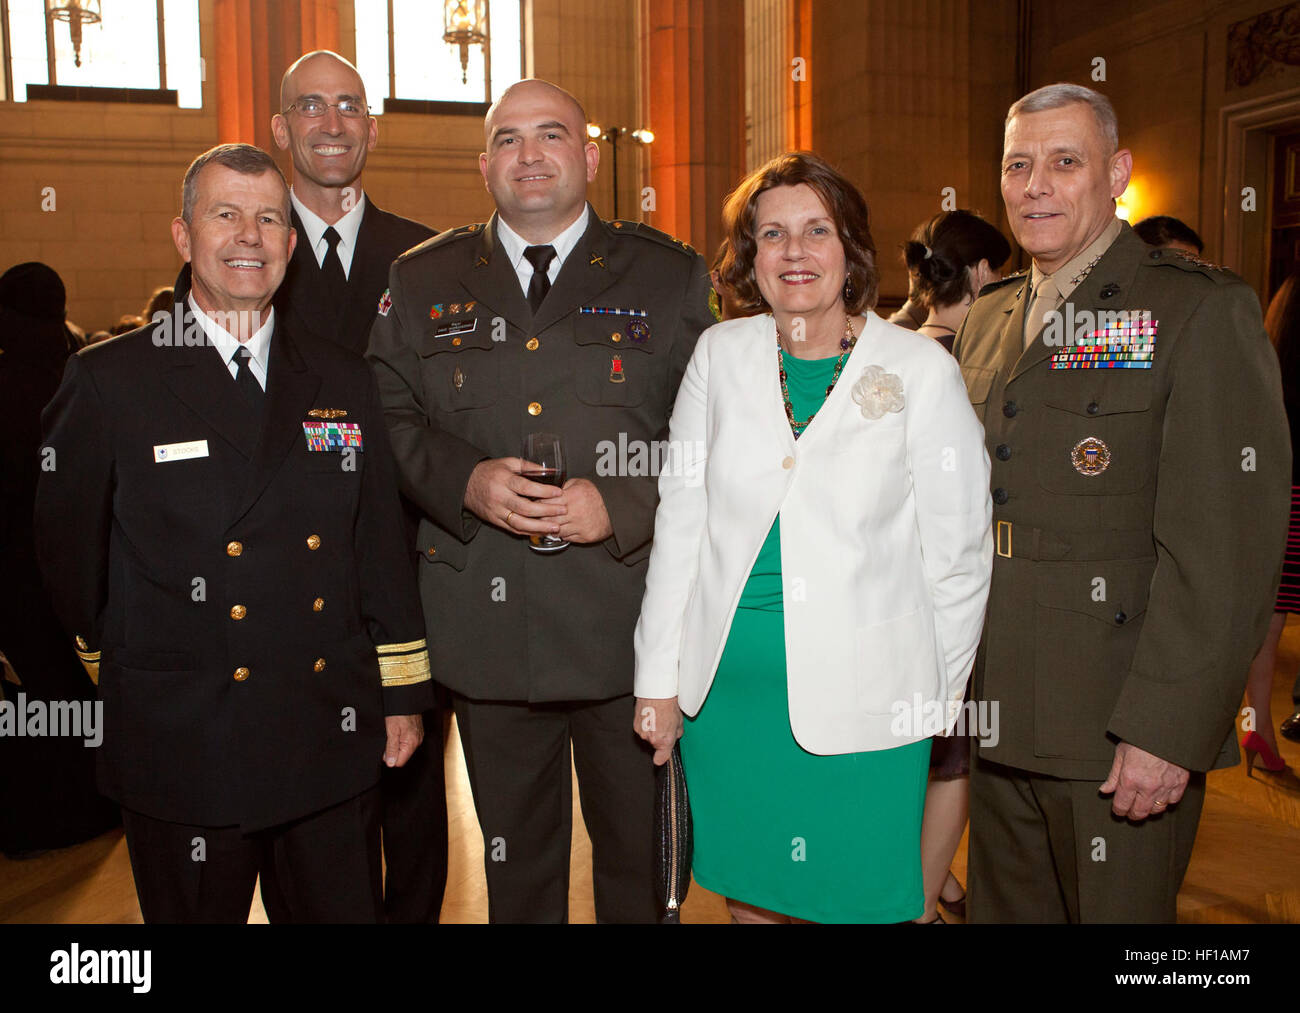 From left, U.S. Navy Rear Adm. Alton Stocks, the commander of Navy Medicine National Capital Area and the Walter Reed National Military Medical Center; Command Master Chief Terry J. Prince; Georgian army Maj. David Khorguashvili; Debbie Paxton; and Gen. John M. Paxton Jr., the assistant commandant of the Marine Corps, stand for a photo during a Georgian Independence Day celebration at the Andrew W. Mellon Auditorium in Washington, D.C., June 4, 2013. Georgia declared its independence May 26, 1918, in the midst of the Russian Civil War. (U.S. Marine Corps photo by Cpl. Tia Dufour/Released) Geor Stock Photo